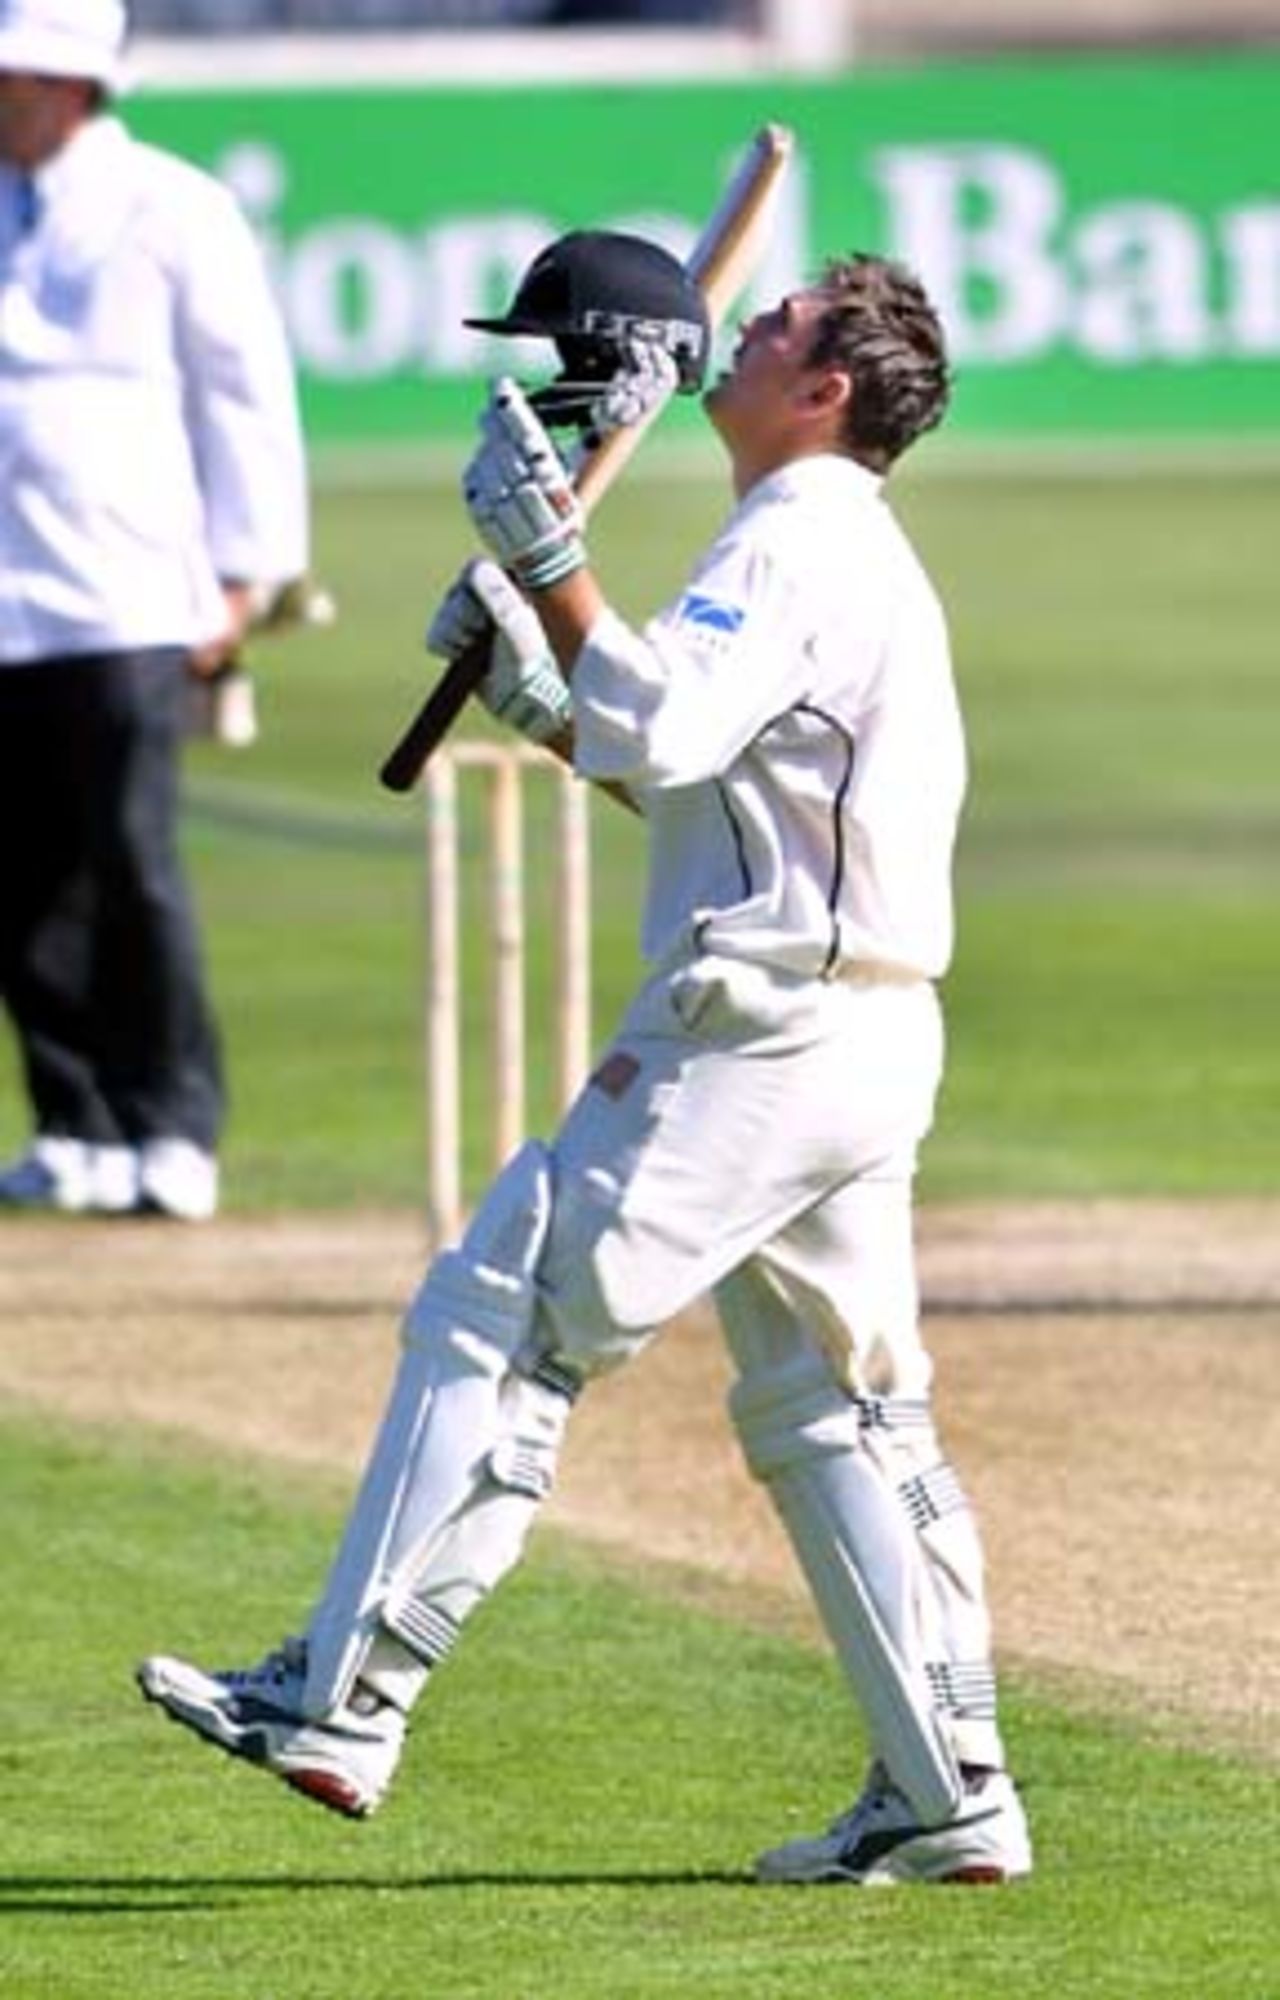 New Zealand batsman Mathew Sinclair looks skyward after kissing his helmet in celebration of reaching his double century. Sinclair became the just second New Zealand batsman to score two Test double centuries after Glenn Turner. Sinclair went on to score 204 not out. 2nd Test: New Zealand v Pakistan at Jade Stadium, Christchurch, 15-19 March 2001 (16 March 2001).